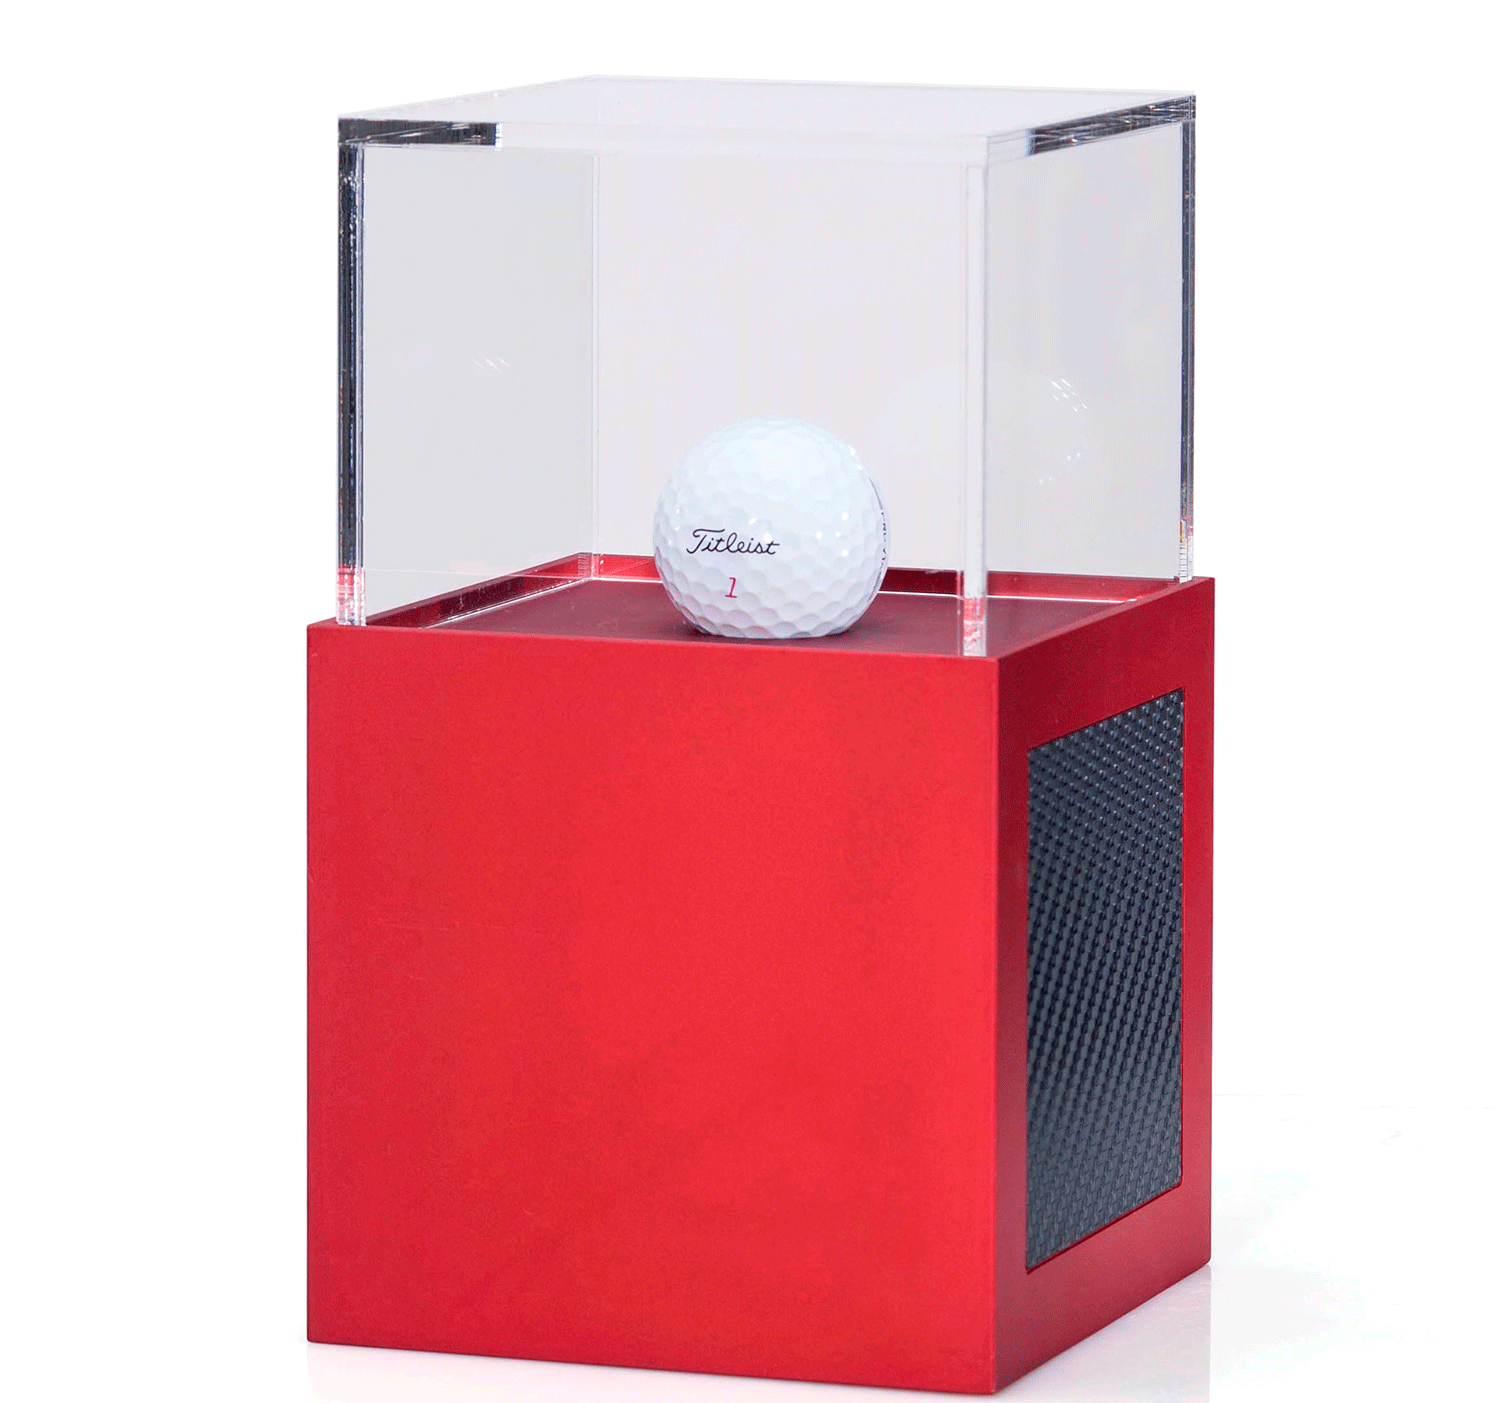 Pin on Golf trophies and modern golf displays by ALU DESIGN